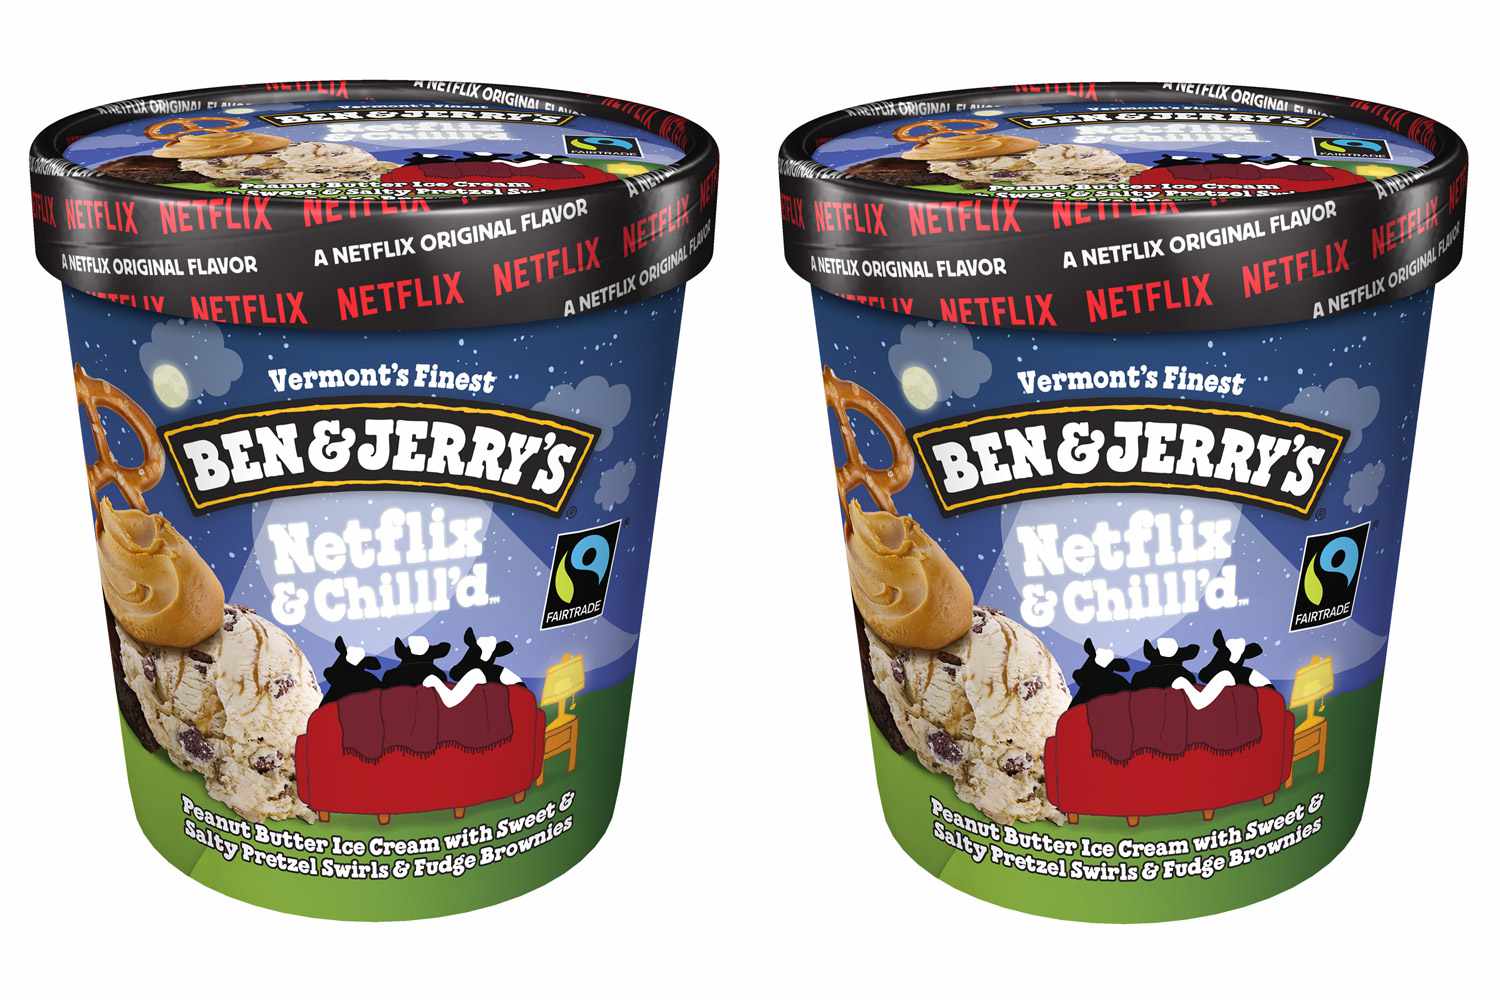 Netflix and Chill'd Ben and Jerry's Pint